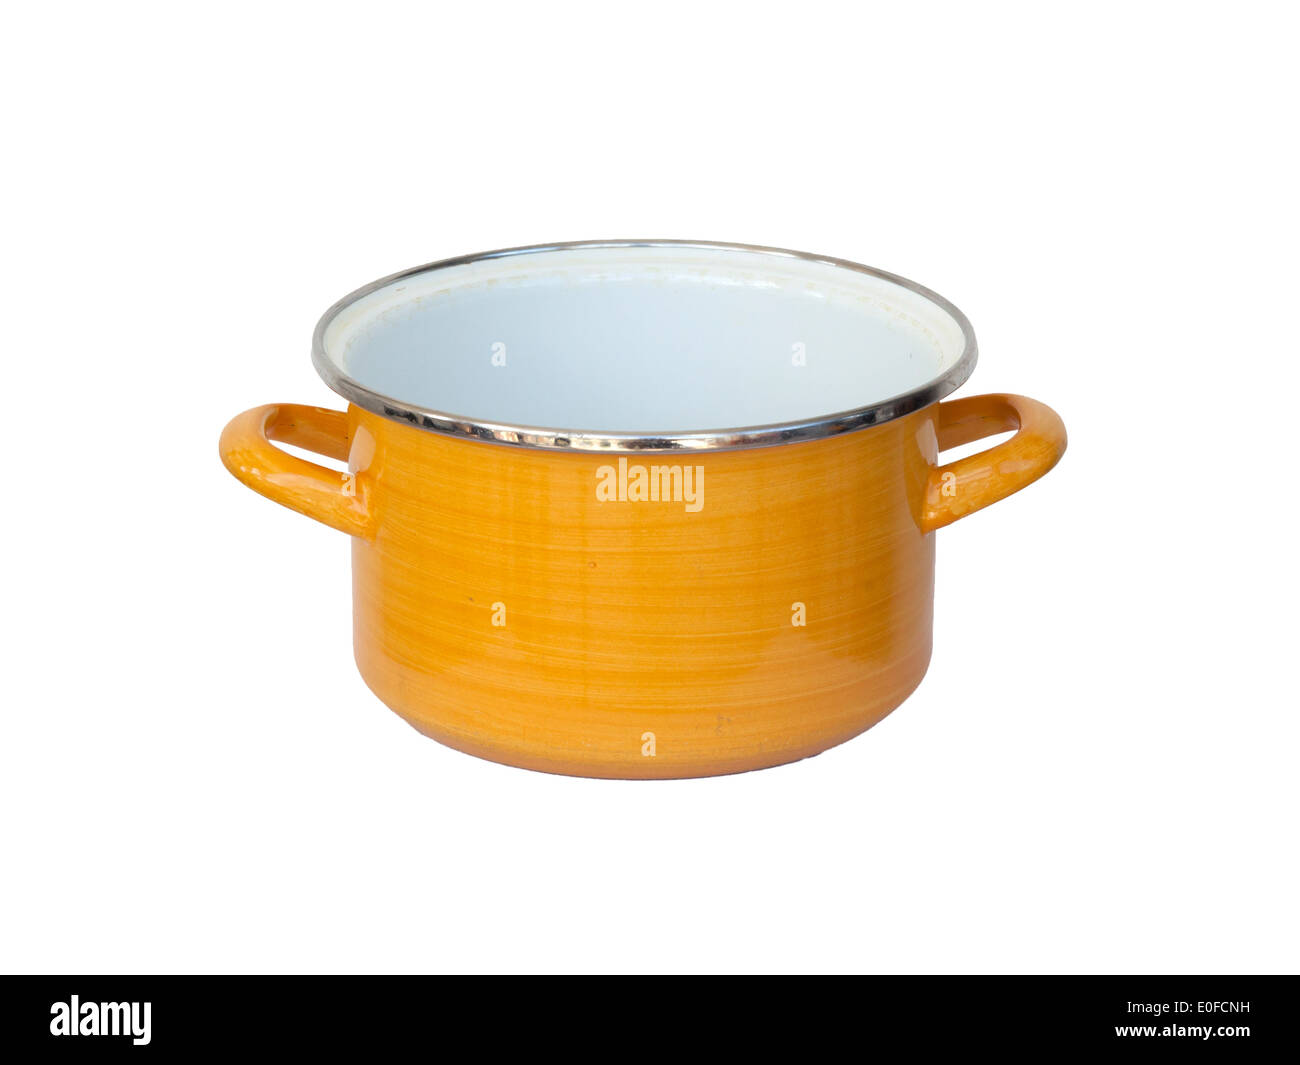 https://c8.alamy.com/comp/E0FCNH/old-yellow-metal-cooking-pot-isolated-on-white-E0FCNH.jpg